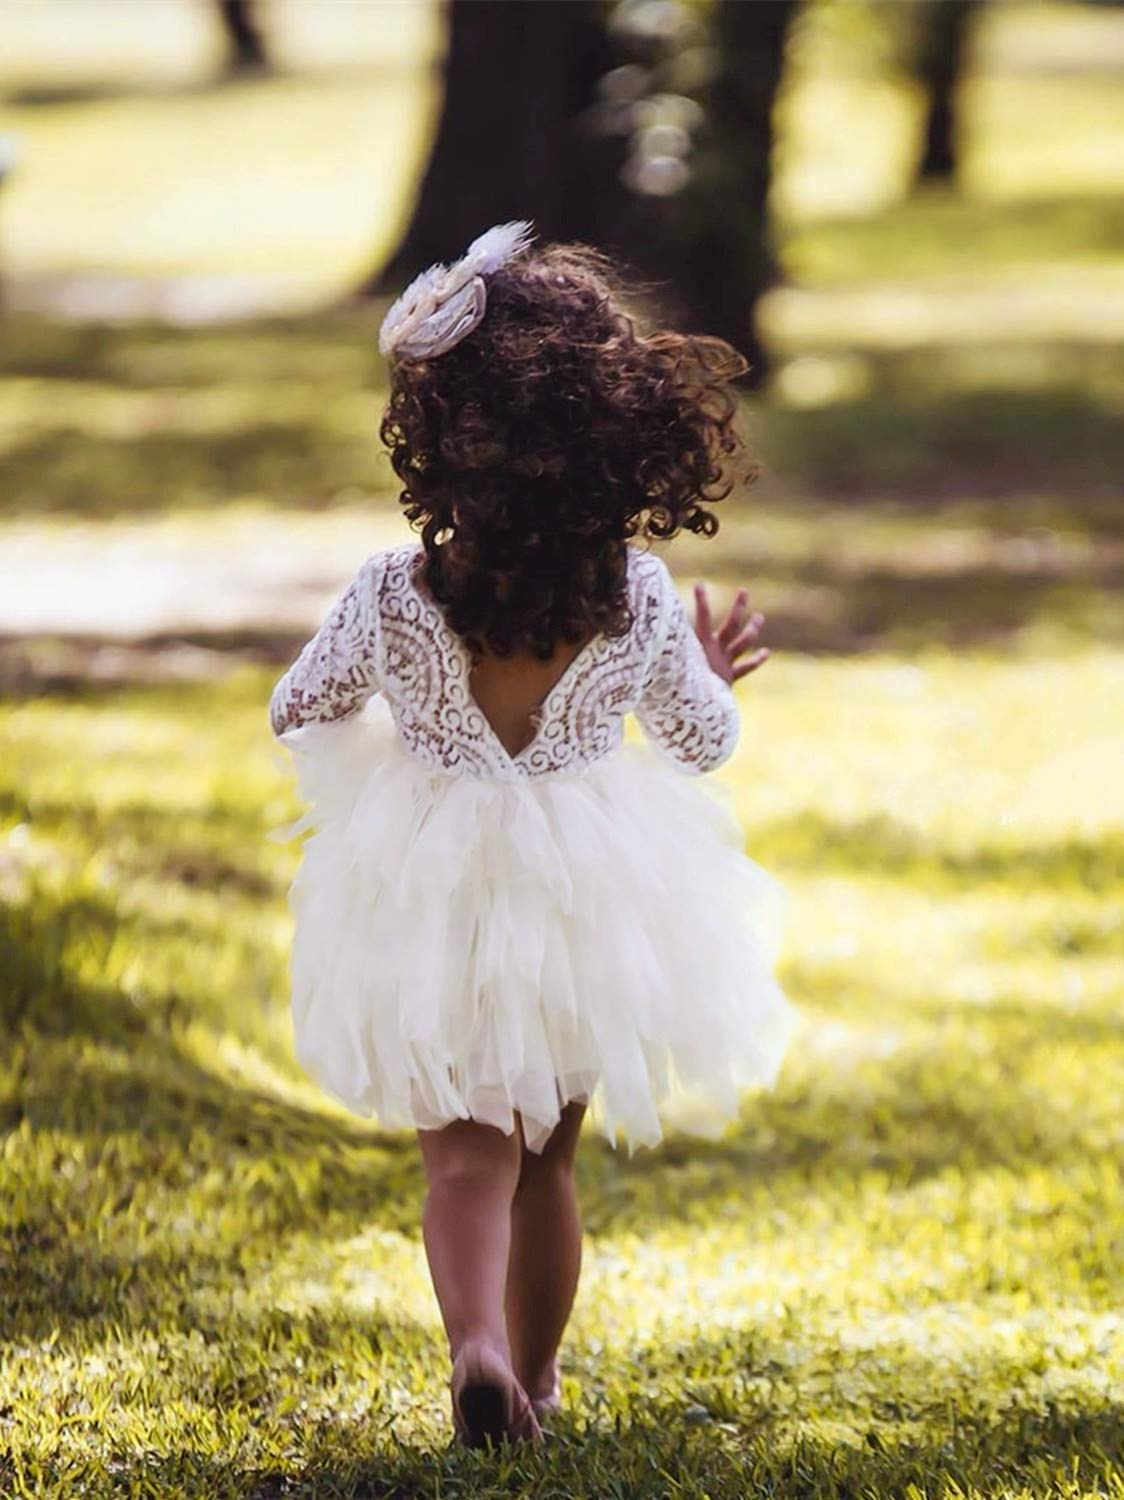 2Bunnies Flower Girl Dress Peony Lace Back A-Line Long Sleeve Tiered Tulle Short (Ivory) - 2BUNNIES